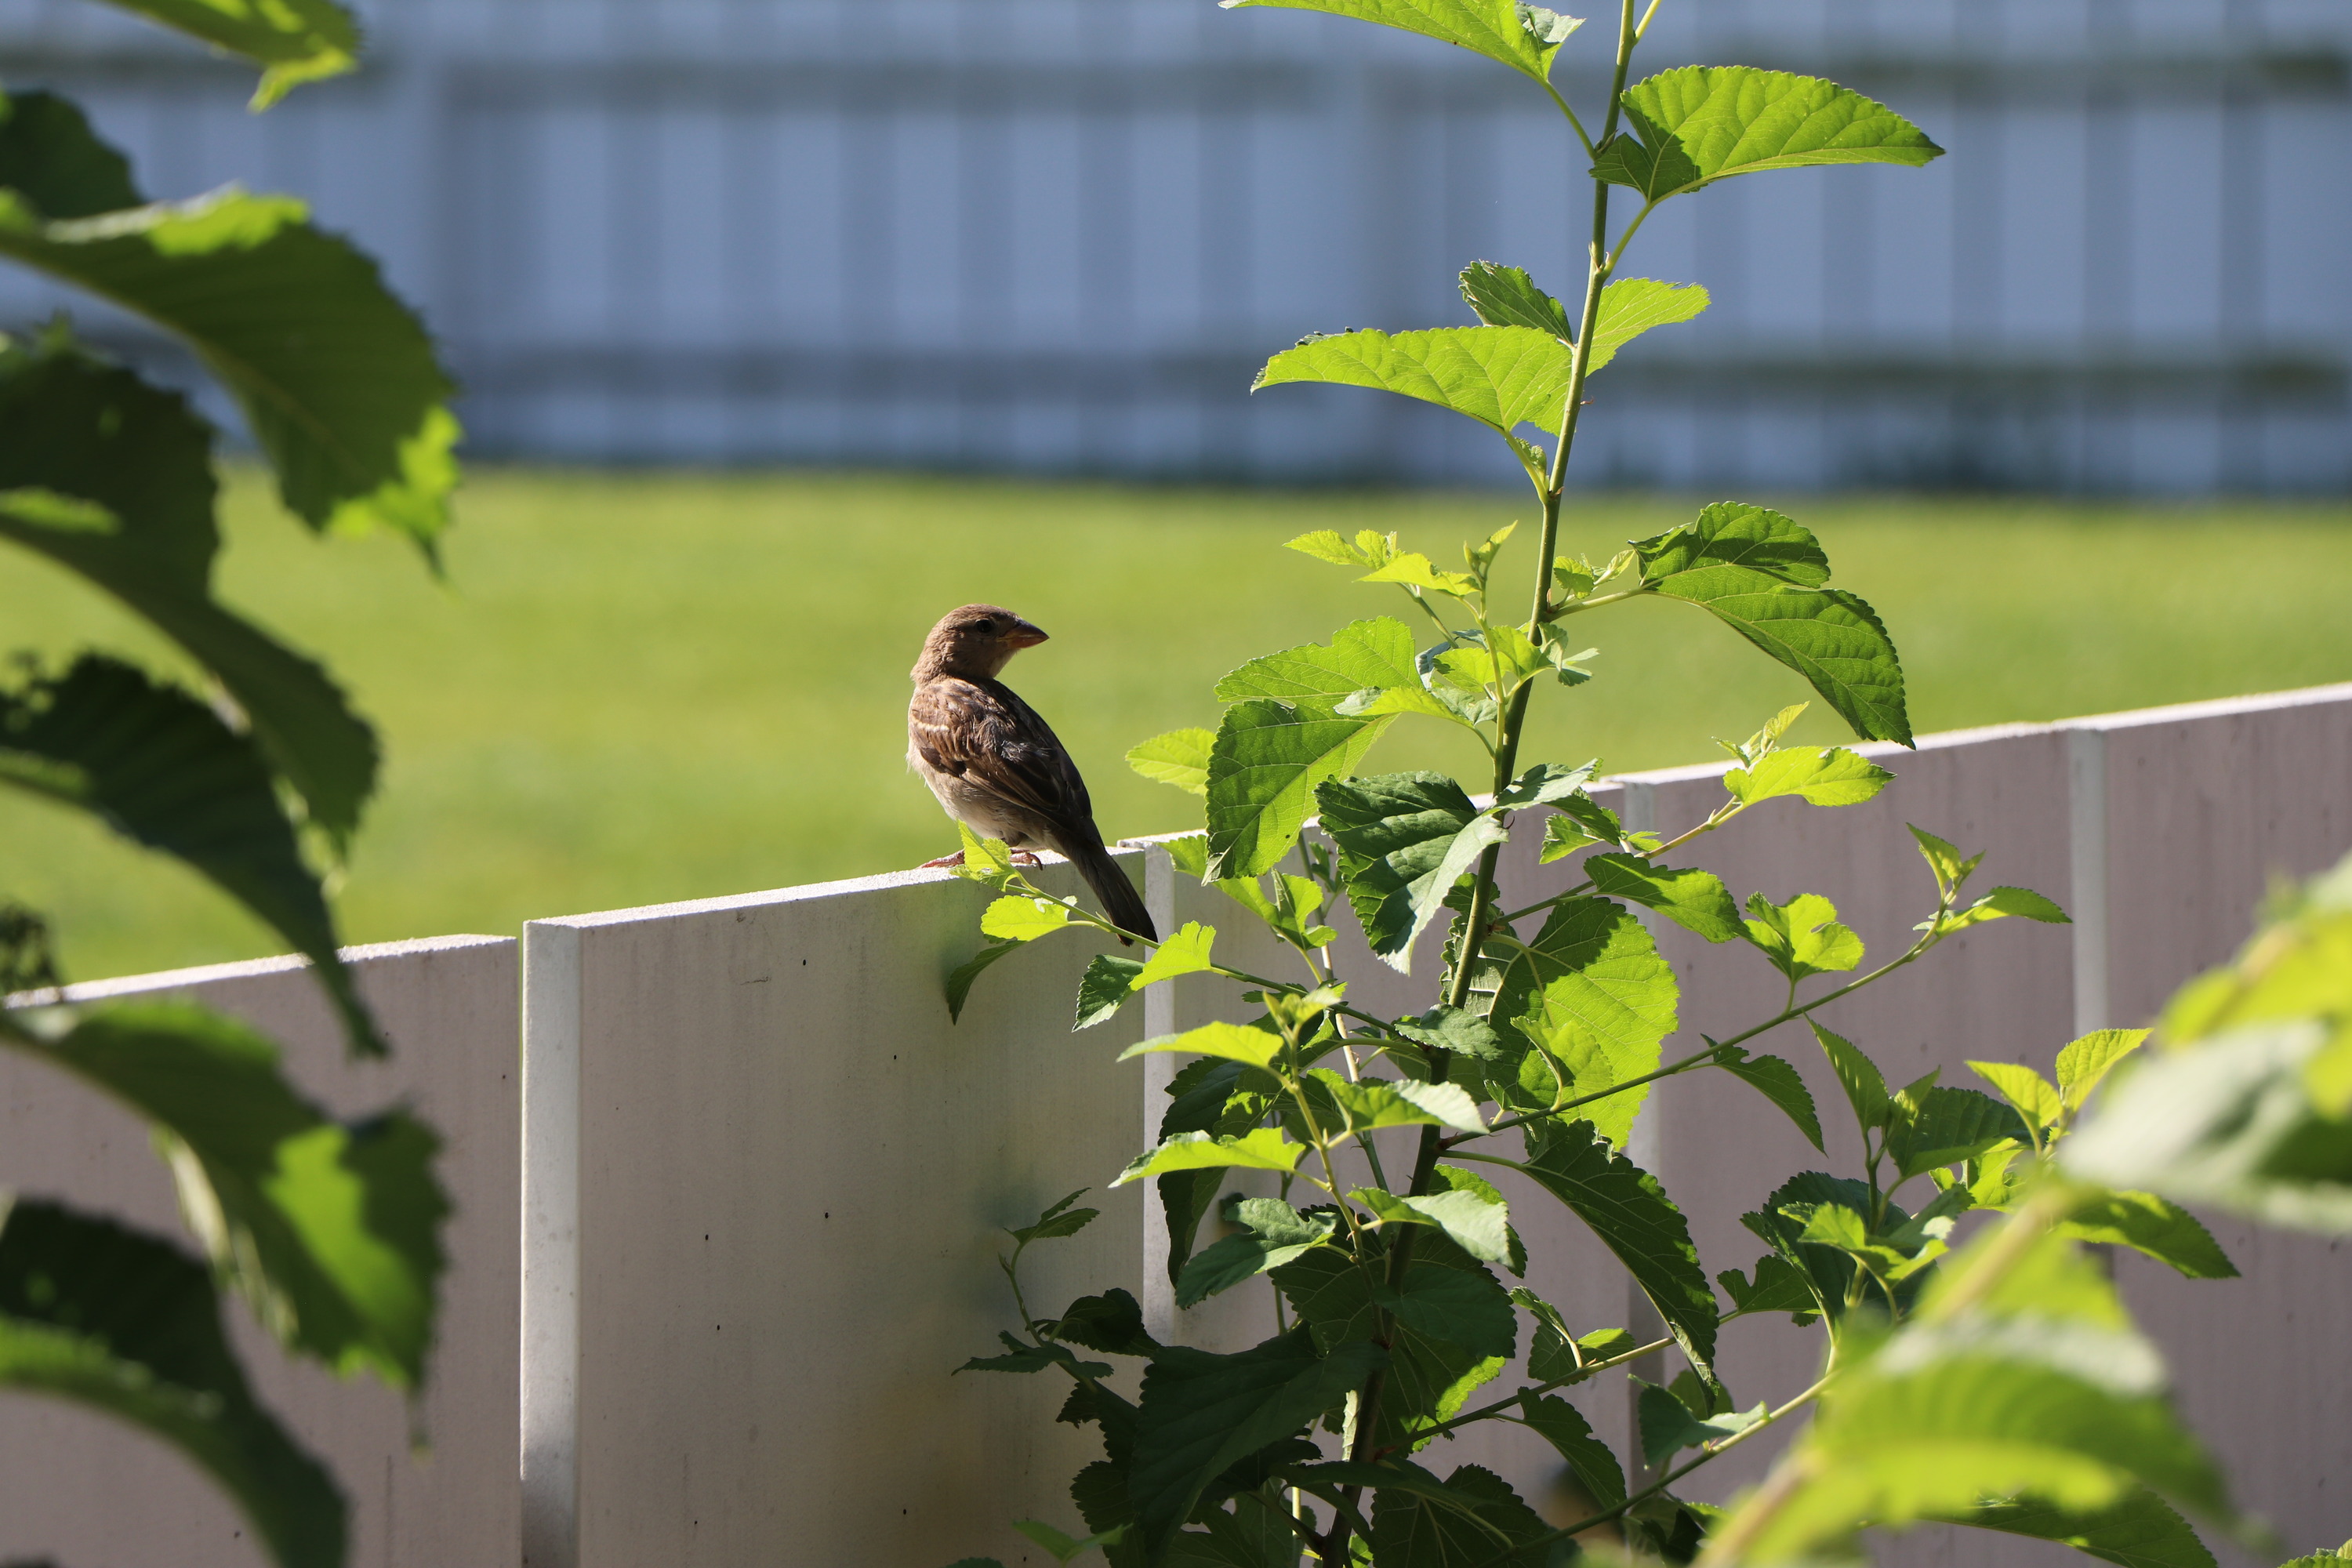 A small brown bird sitting on a white fence.